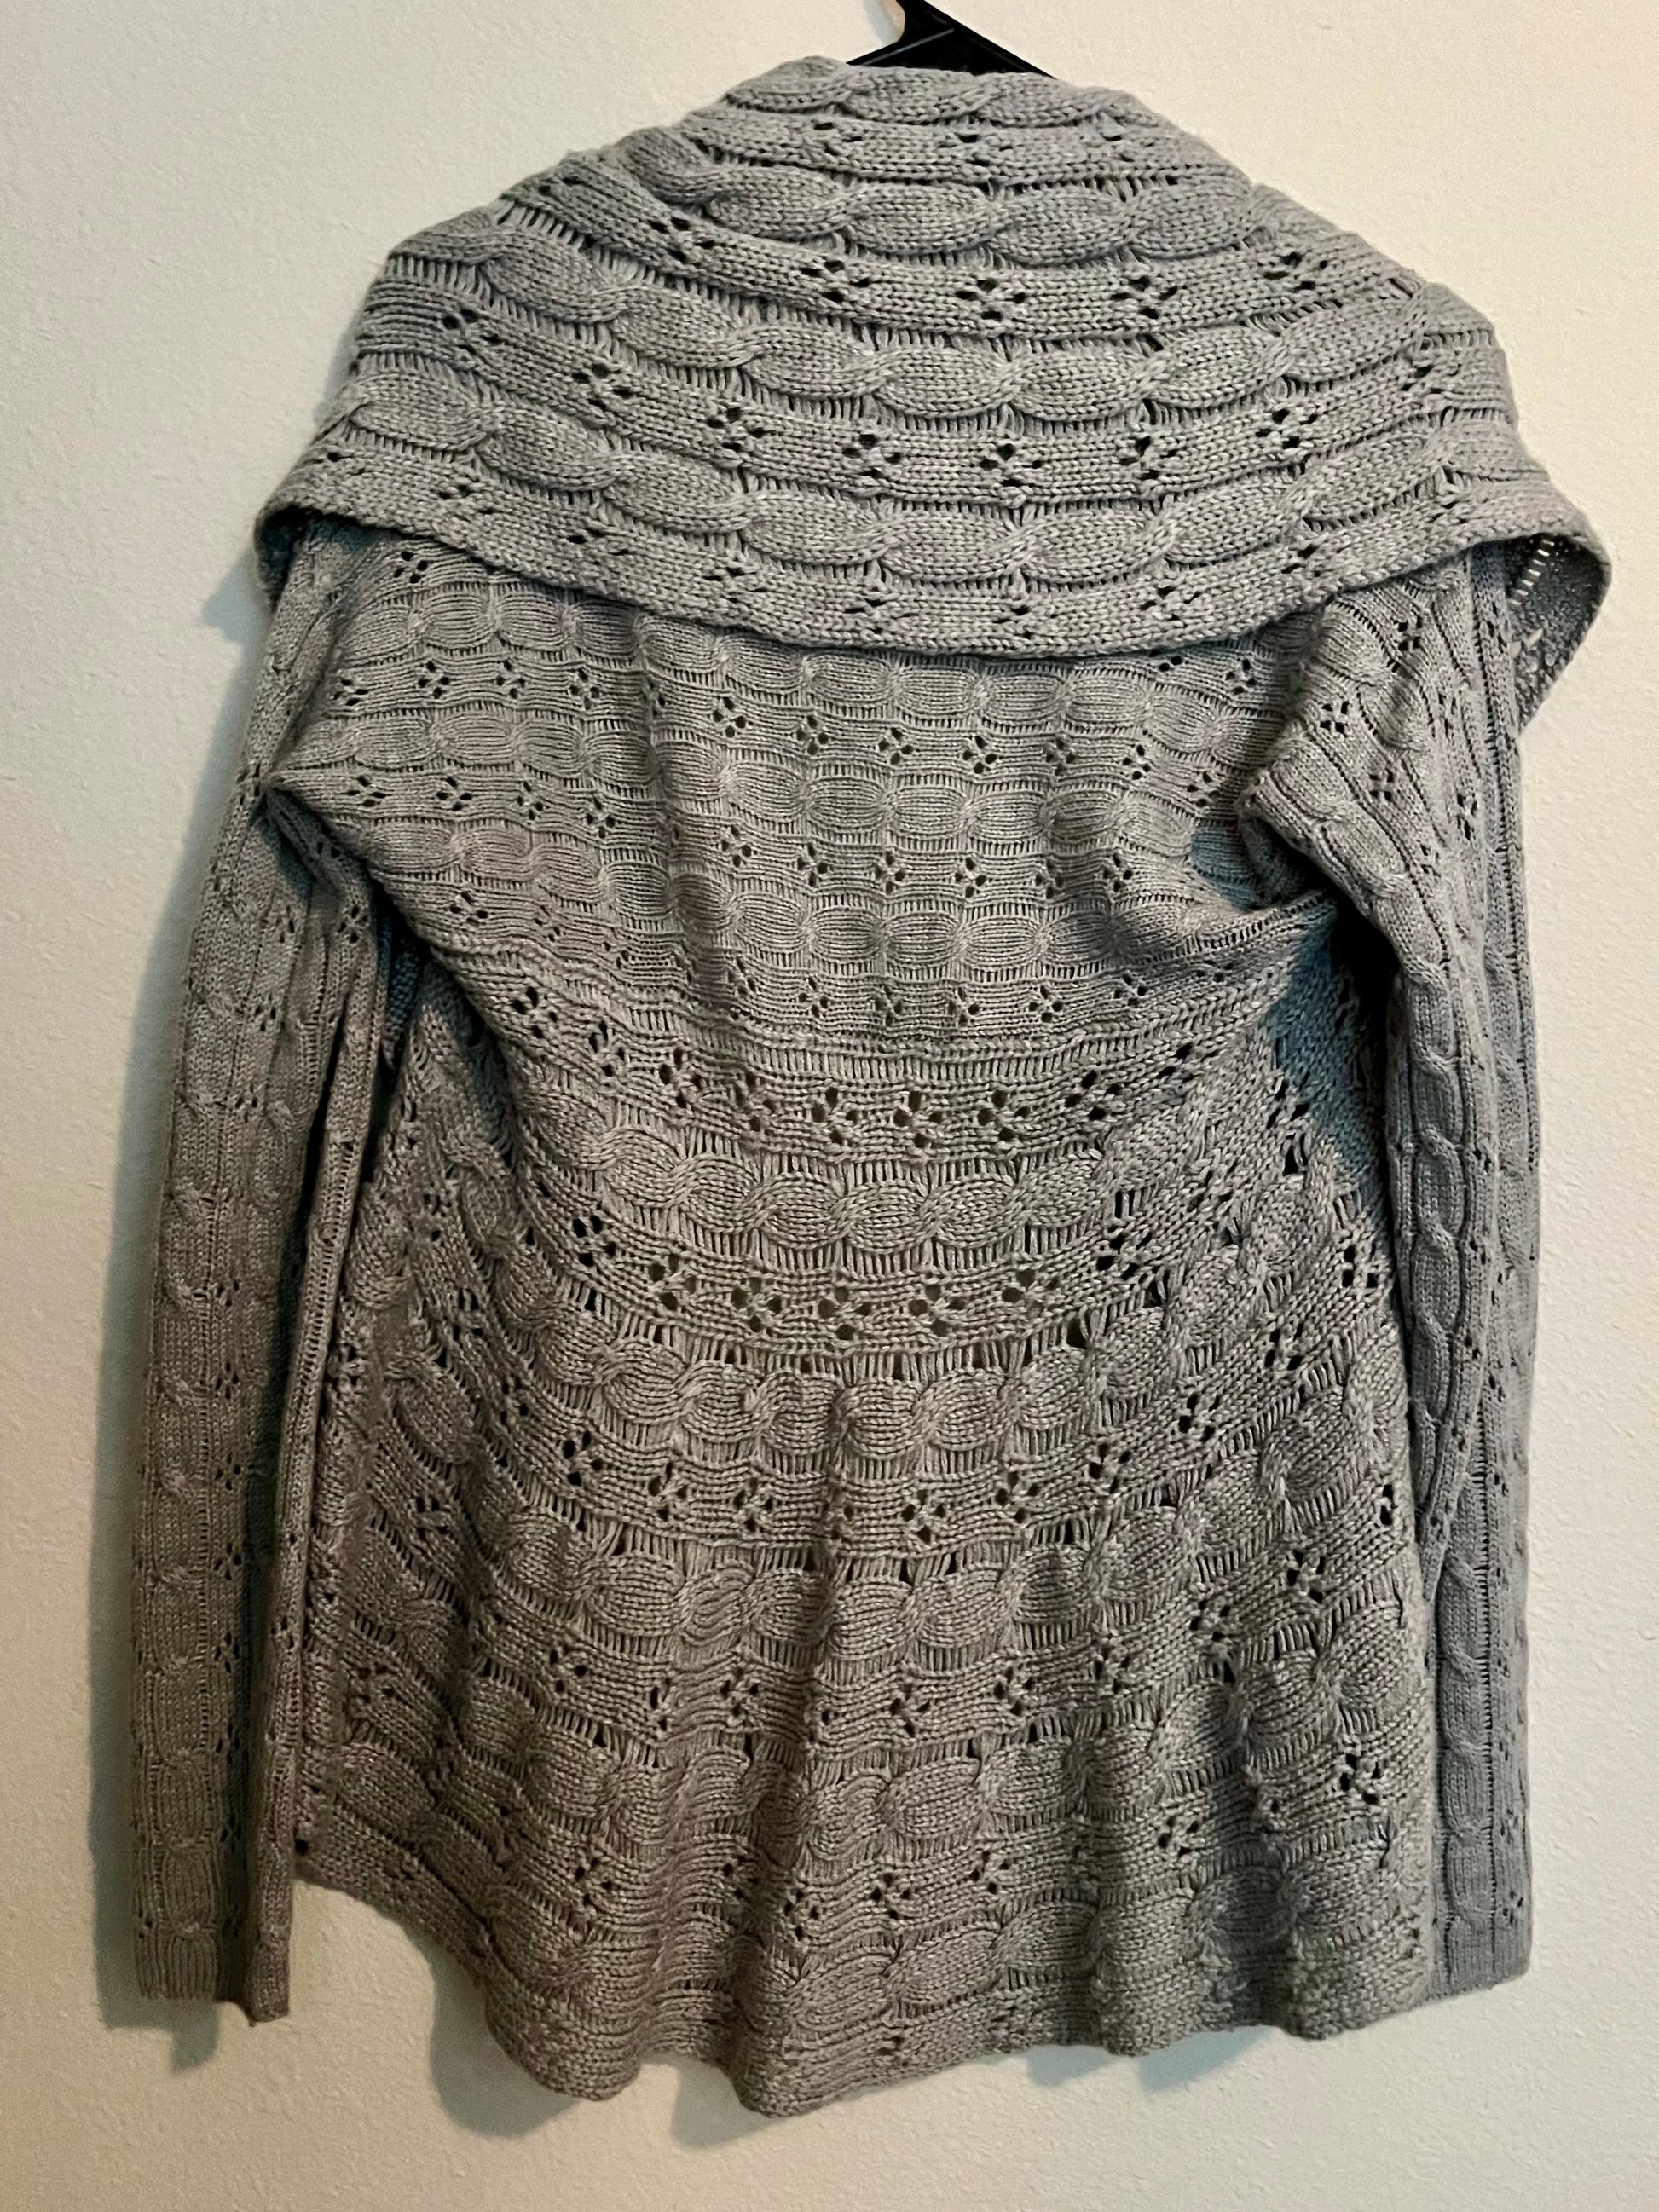 Apt 9 Lace Circle Sweater, Size Small - Tales from the Tangle